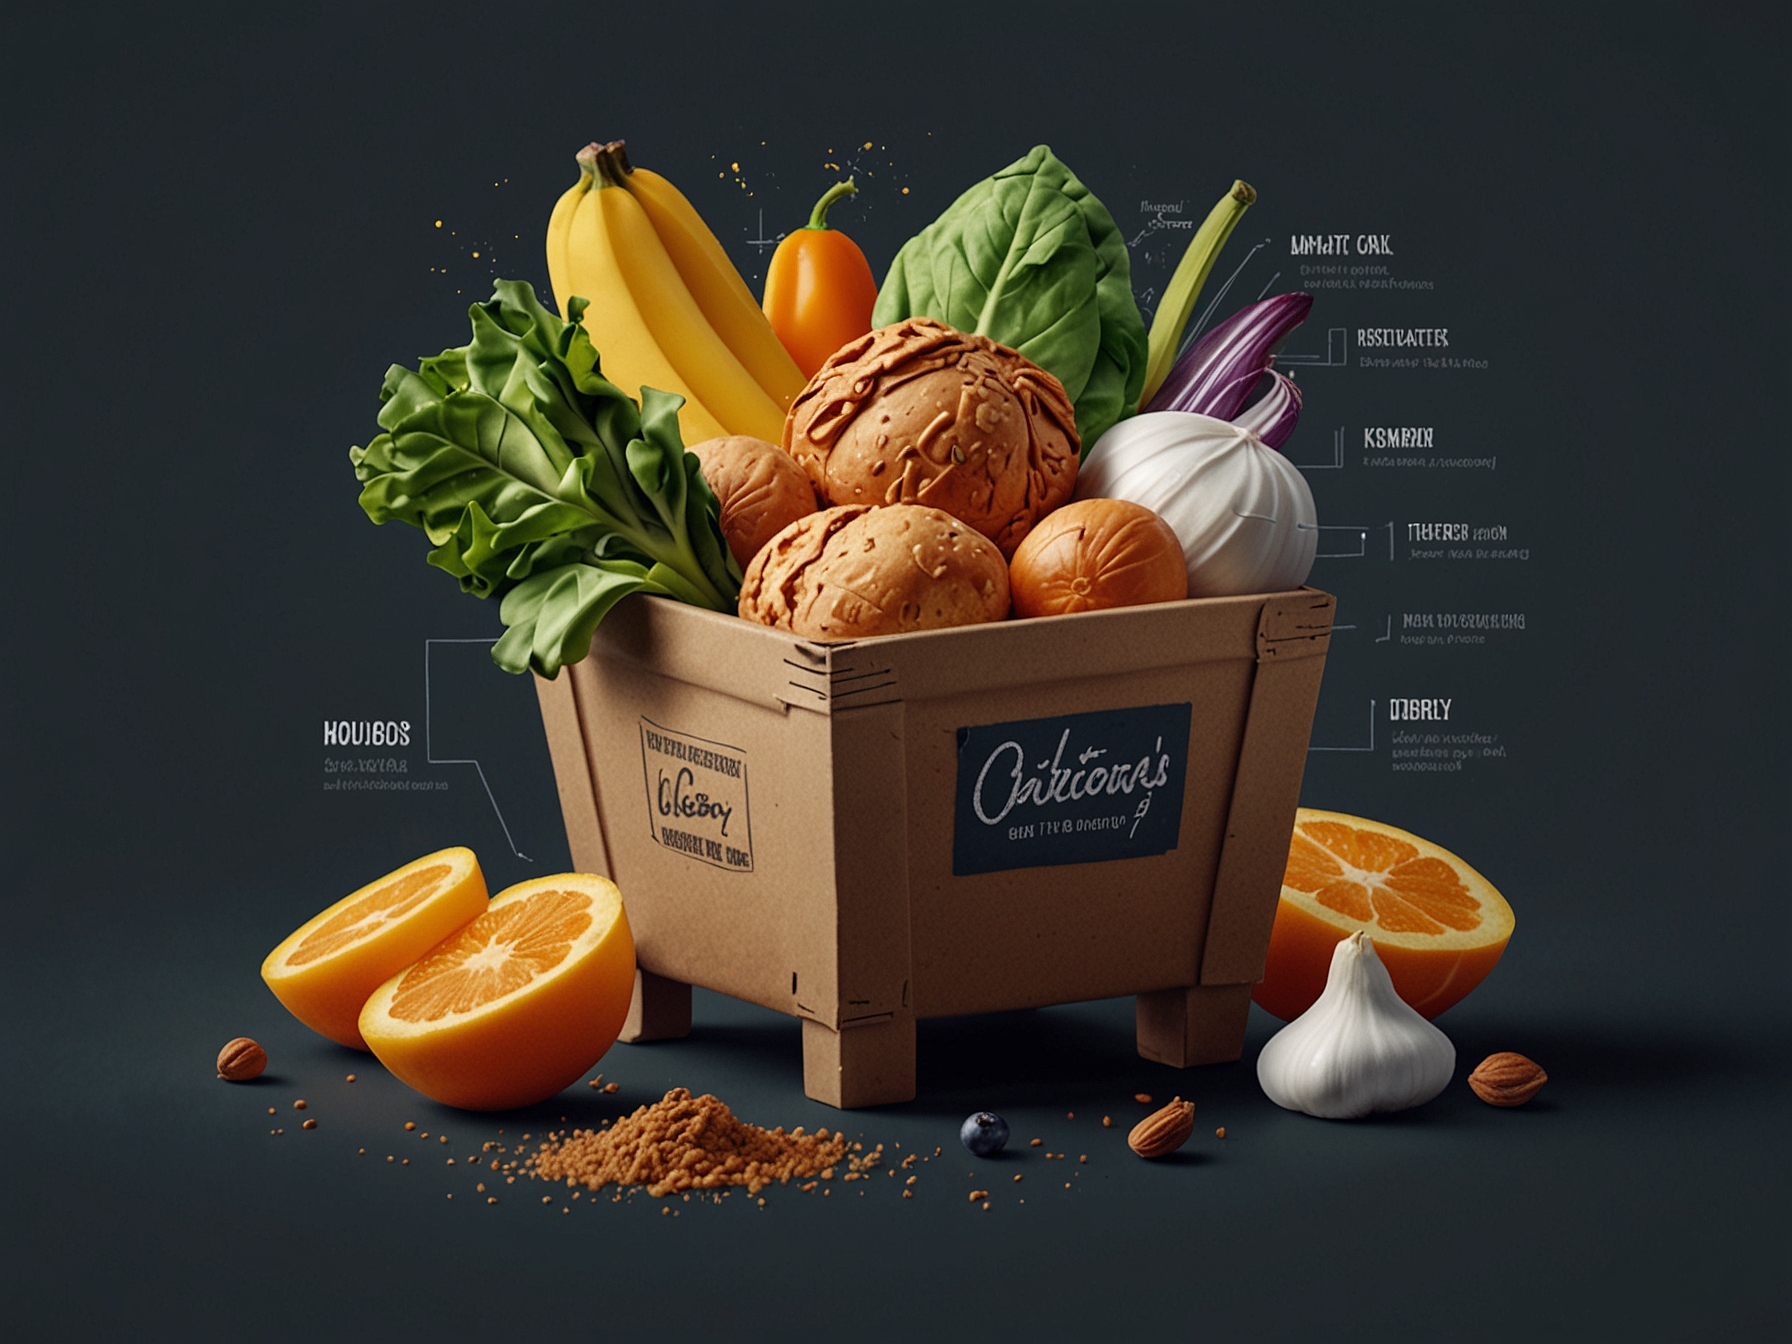 A visual of a food blog with embedded purchase links for ingredients, highlighting Chicory's strategy of aligning shopping opportunities with relevant content for a frictionless user experience.